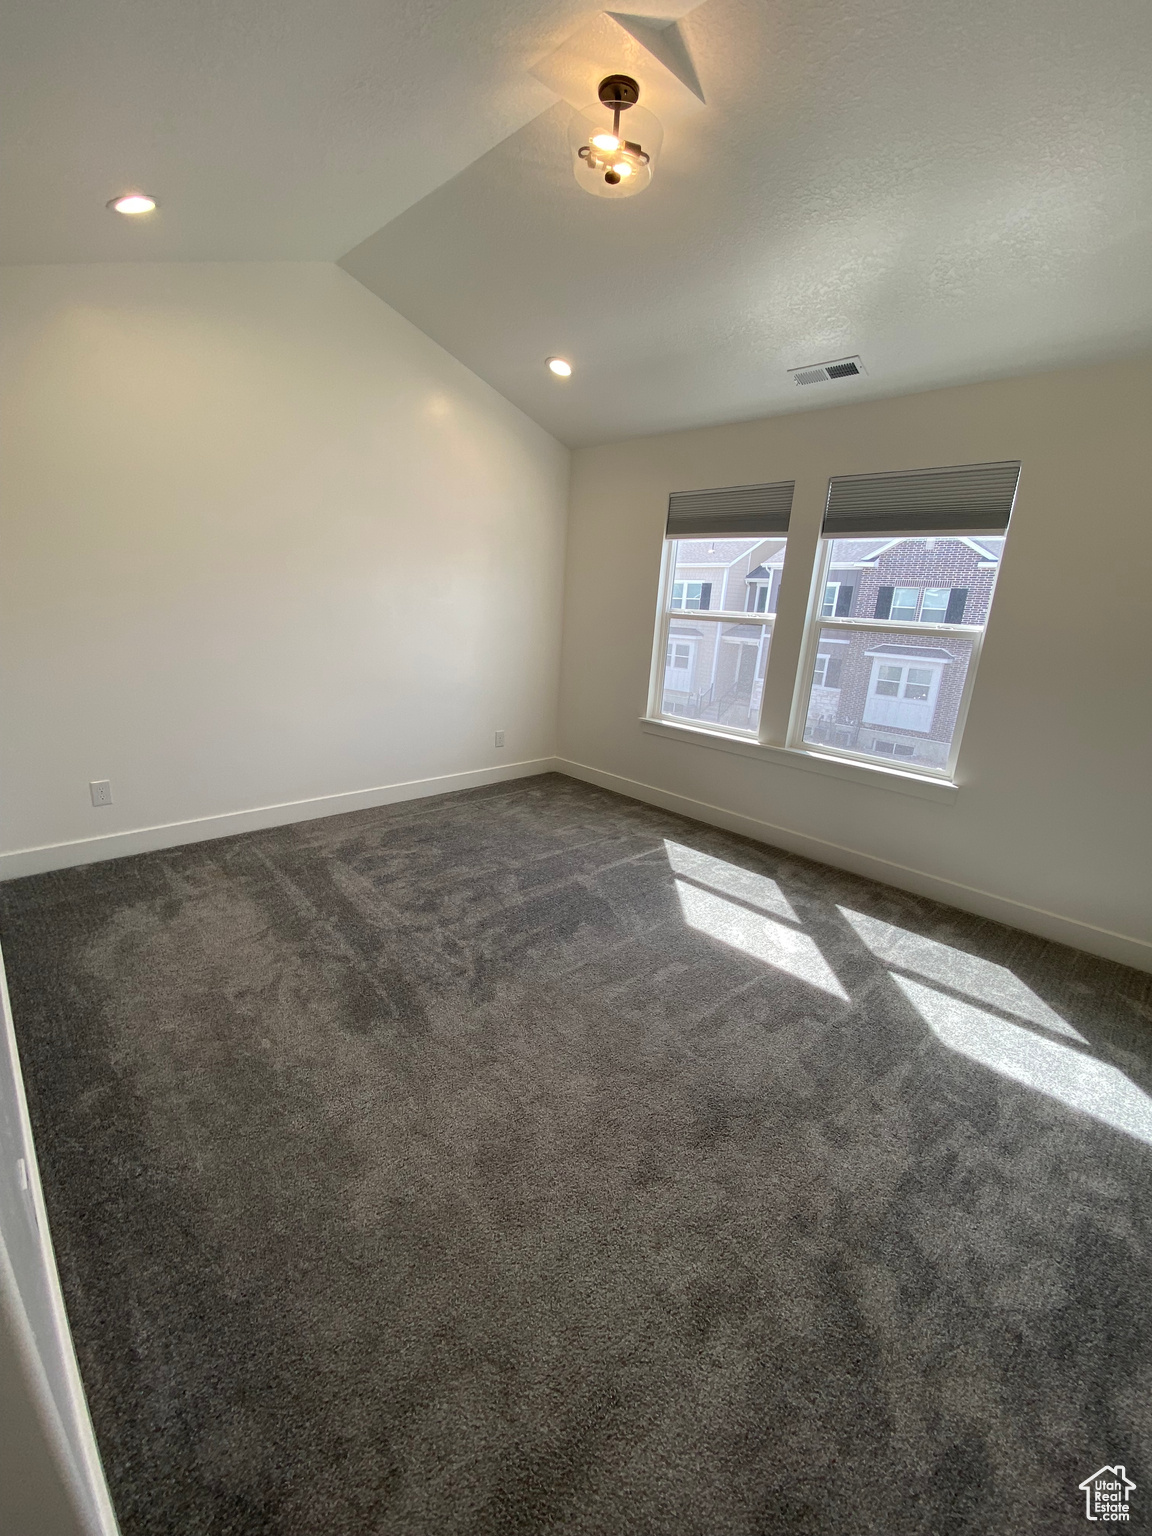 Spare room with dark carpet and vaulted ceiling